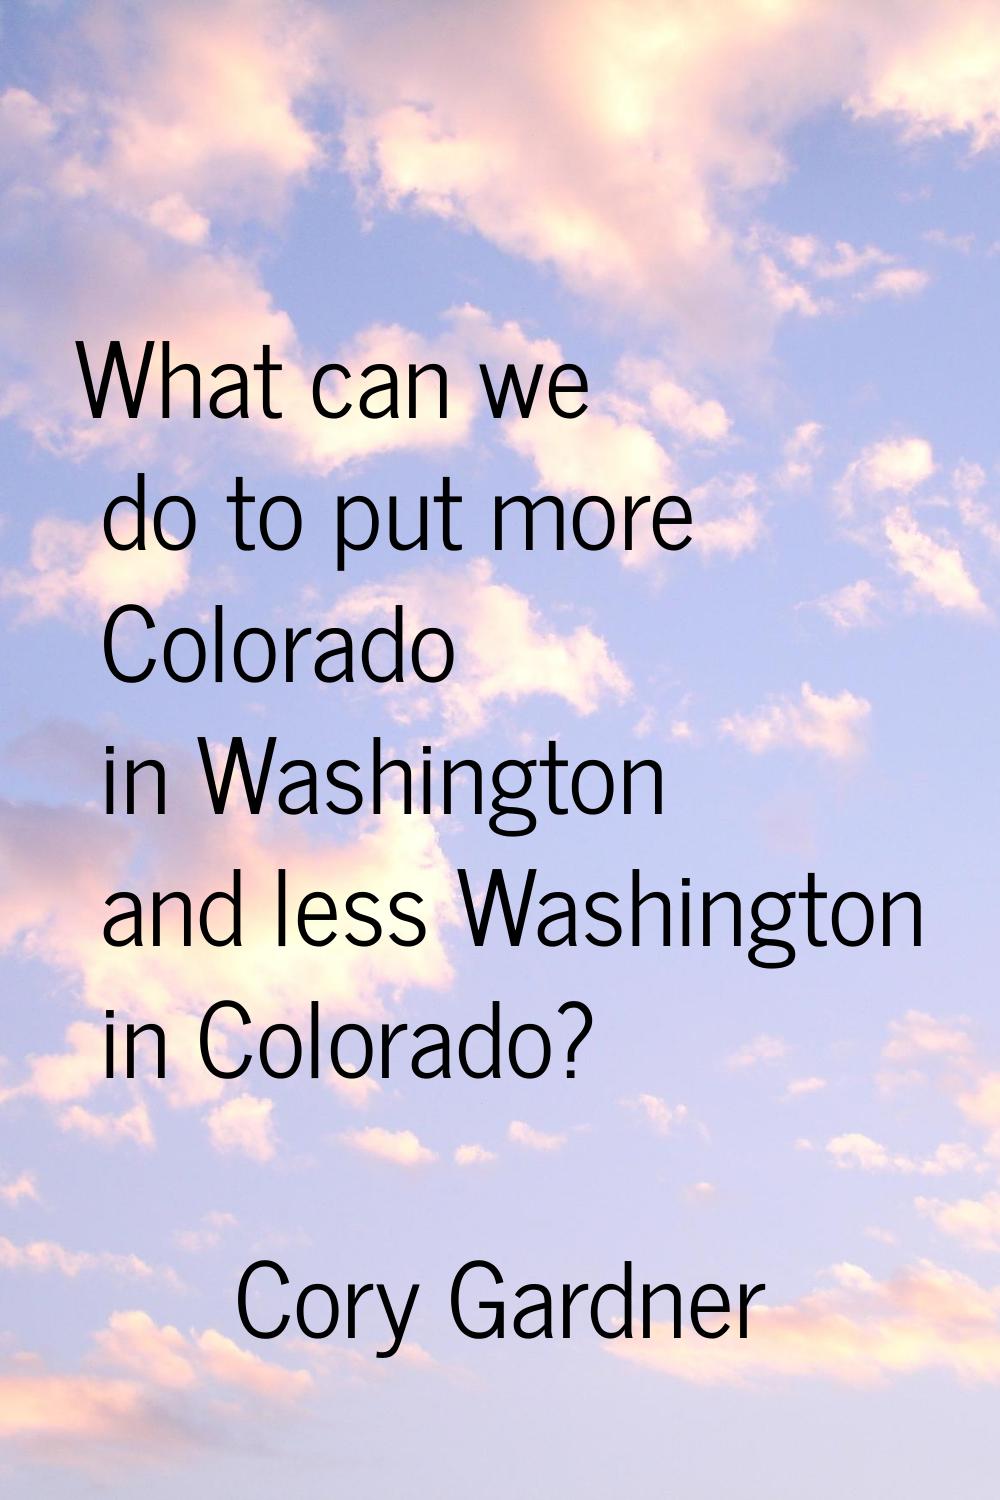 What can we do to put more Colorado in Washington and less Washington in Colorado?